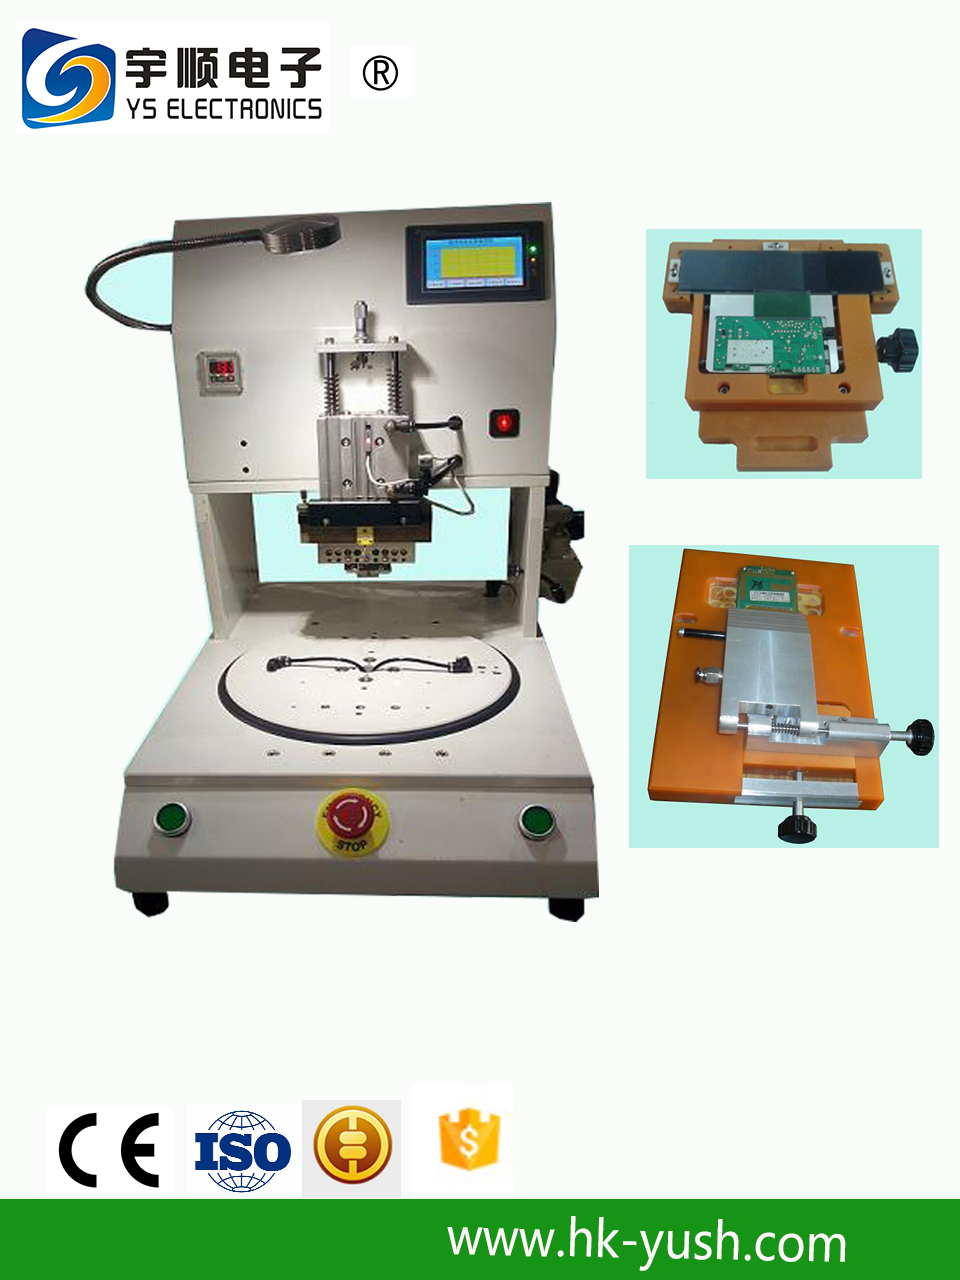 Adjustable Hot Bar Soldering Robot Clear And Precise 380*380*80mm